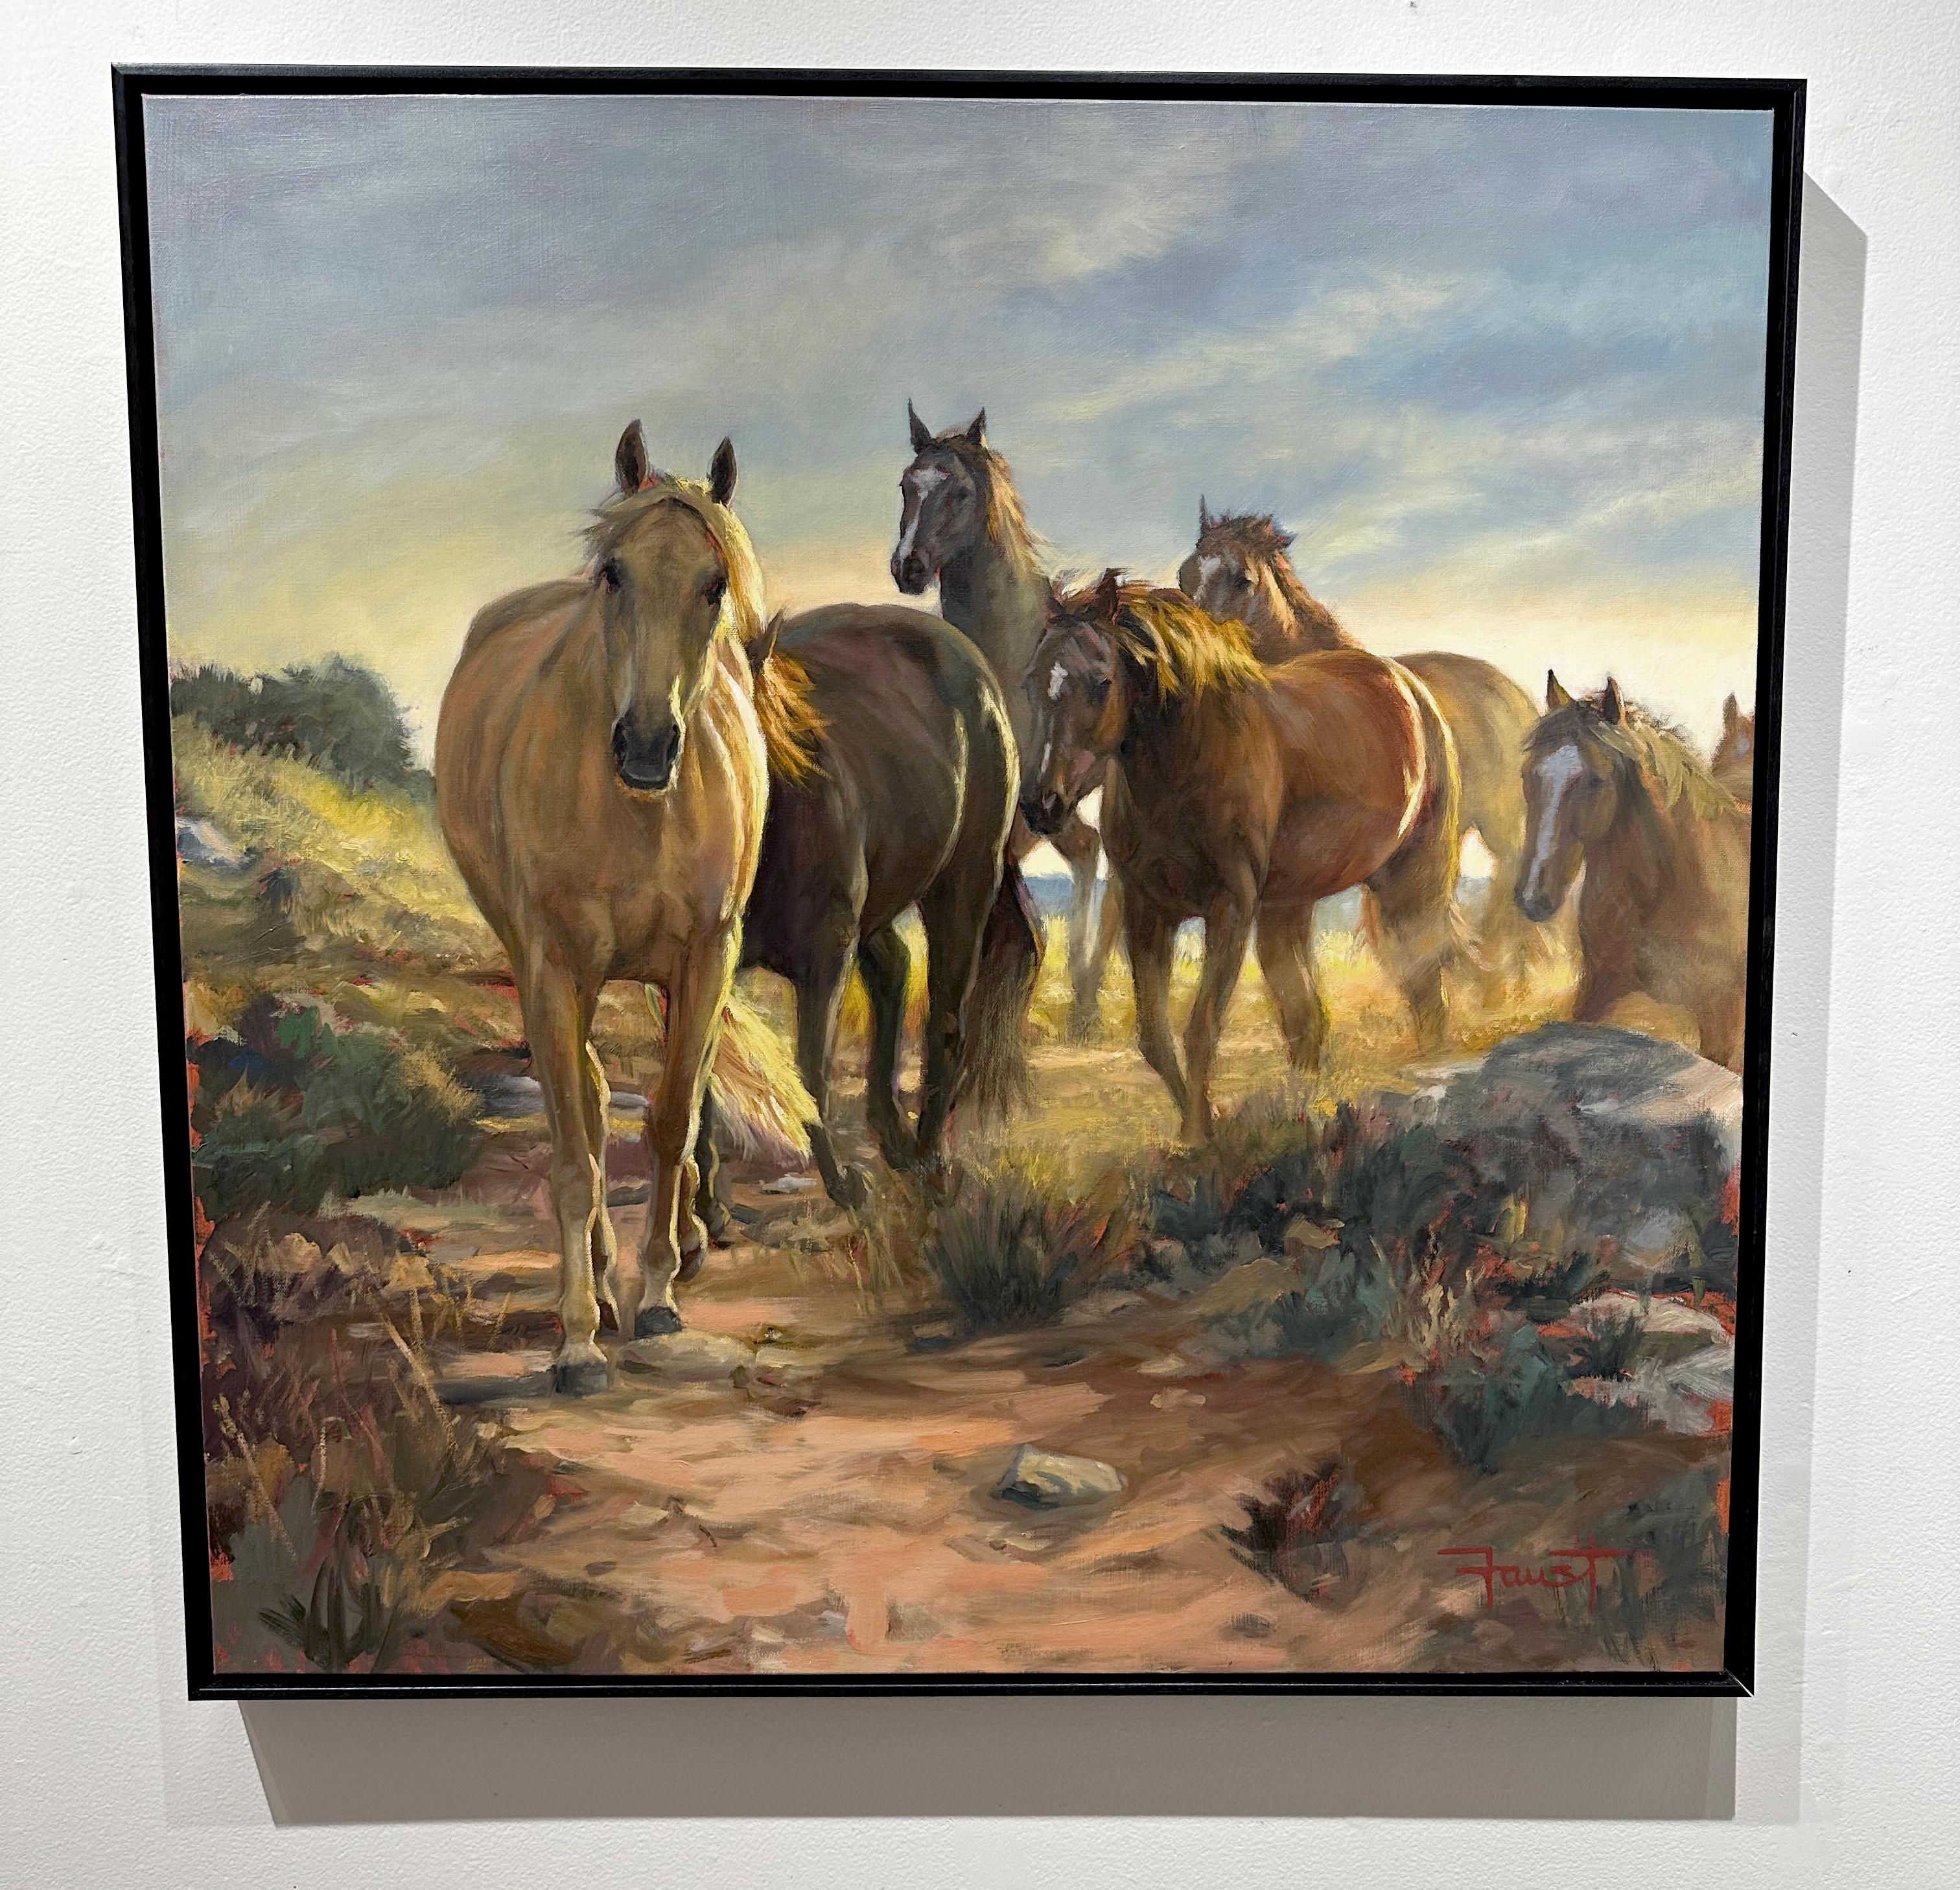 This equine oil painting on canvas, 